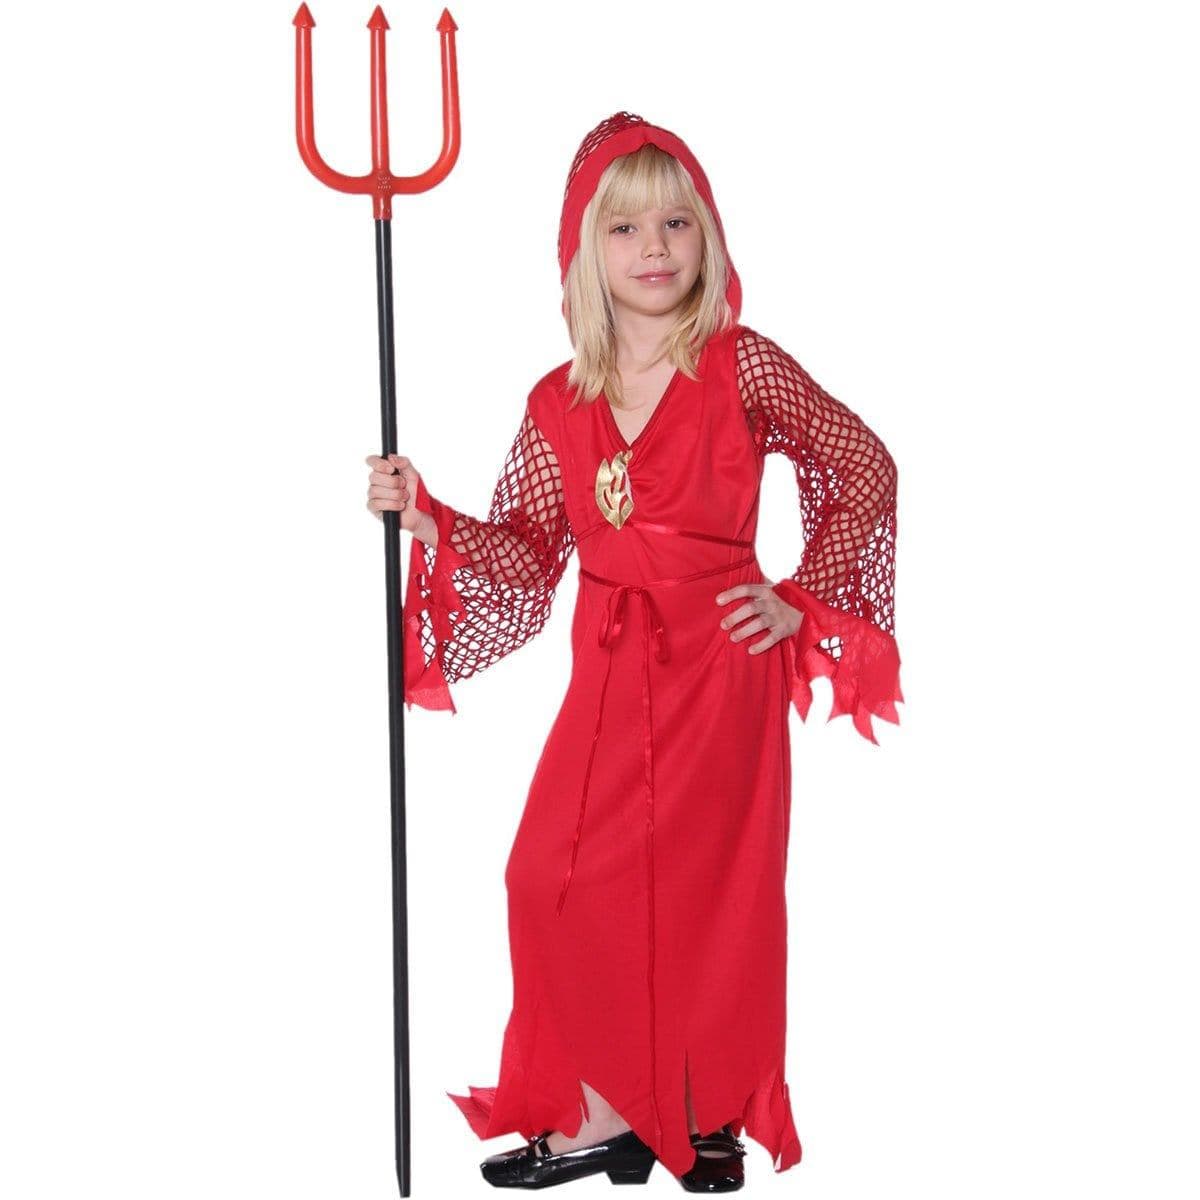 Buy Costume Accessories Devil Pitchfork sold at Party Expert